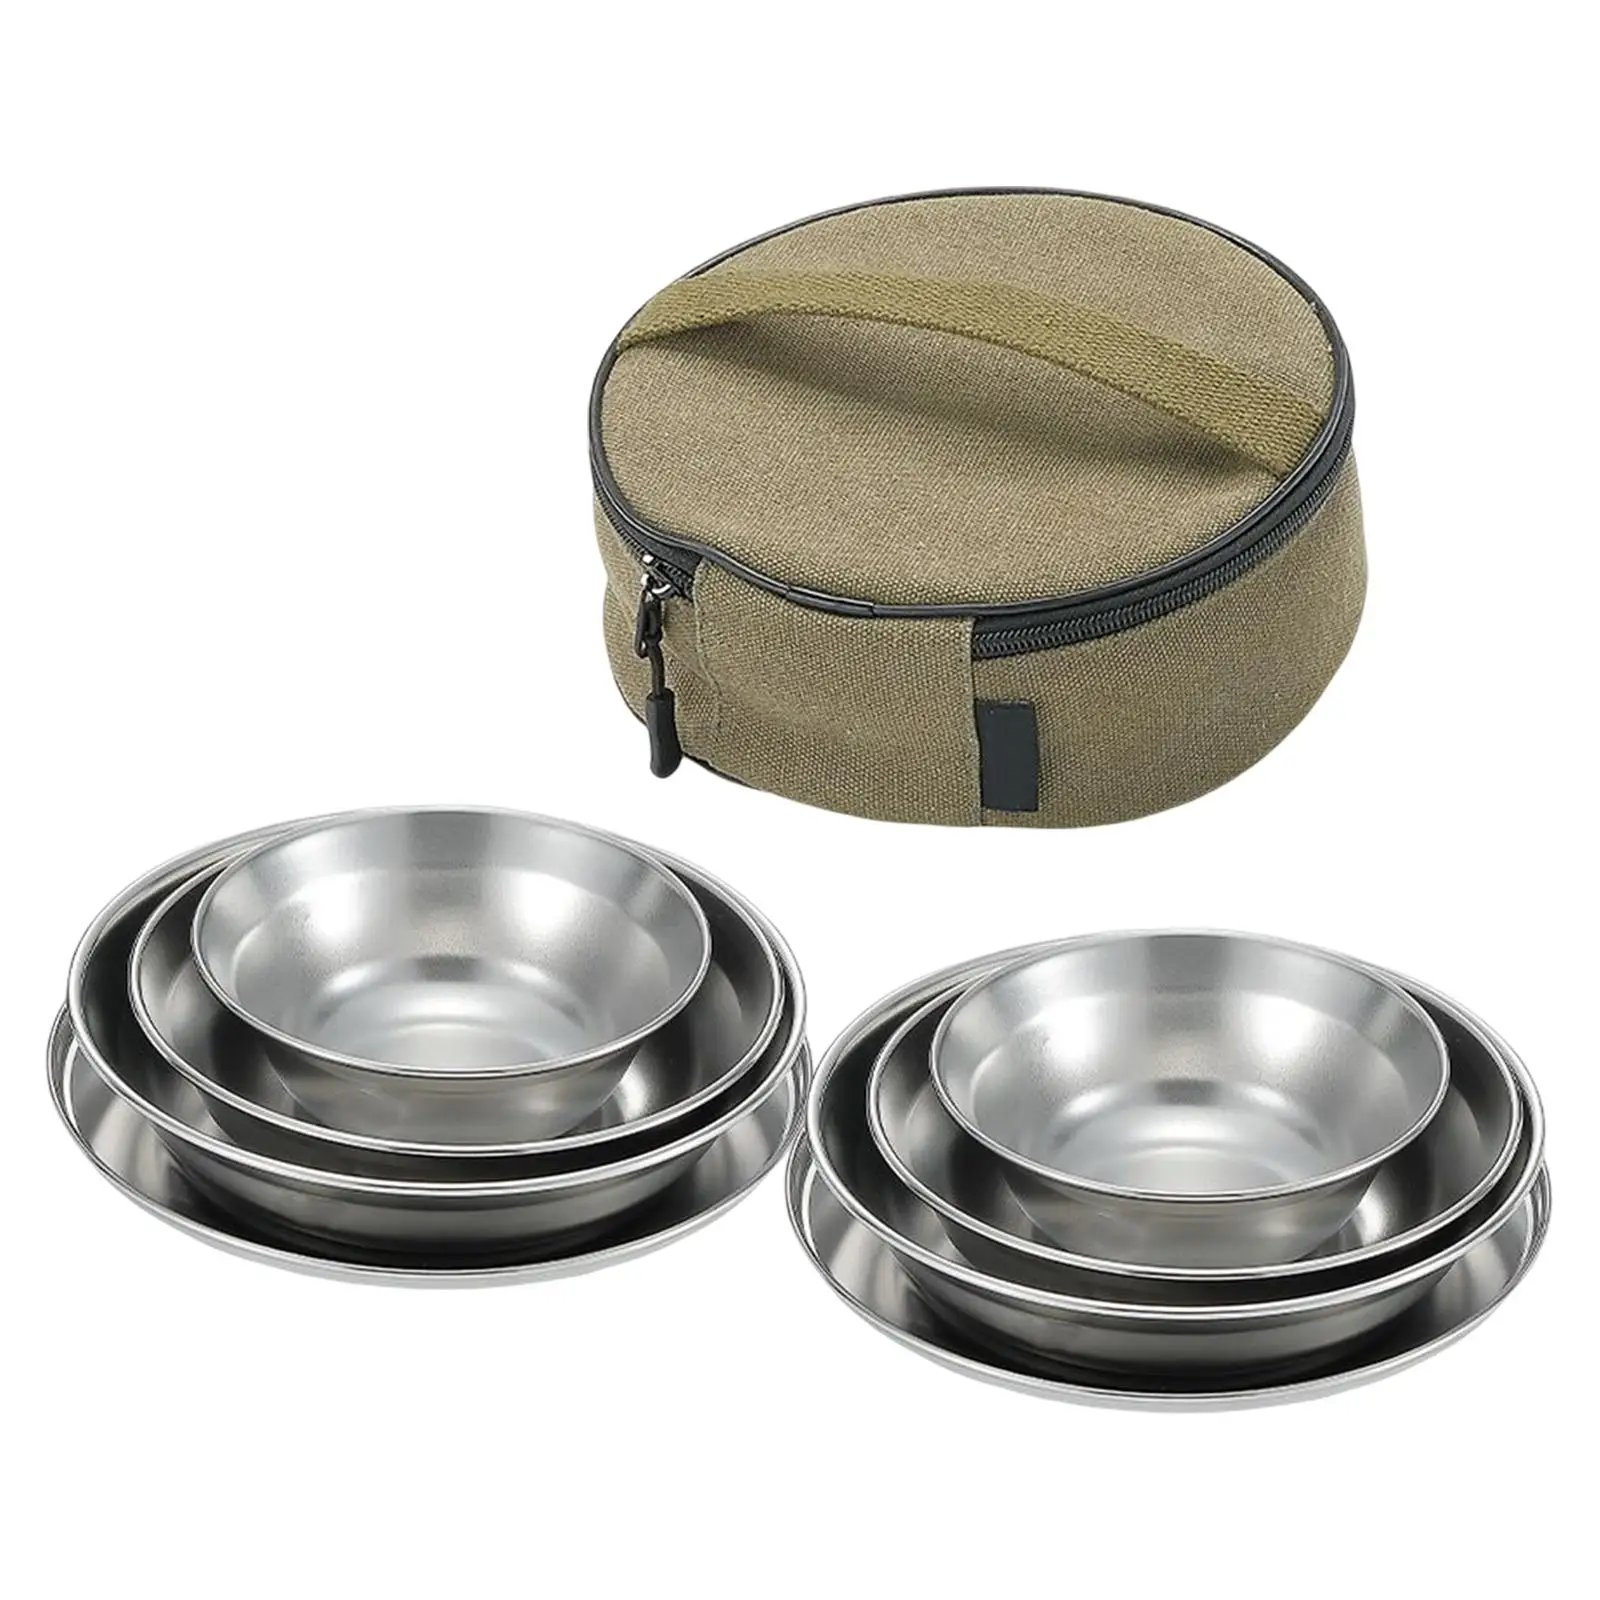 Portable Camping Tableware with Storage Bag Cookware for Trekking Cooking